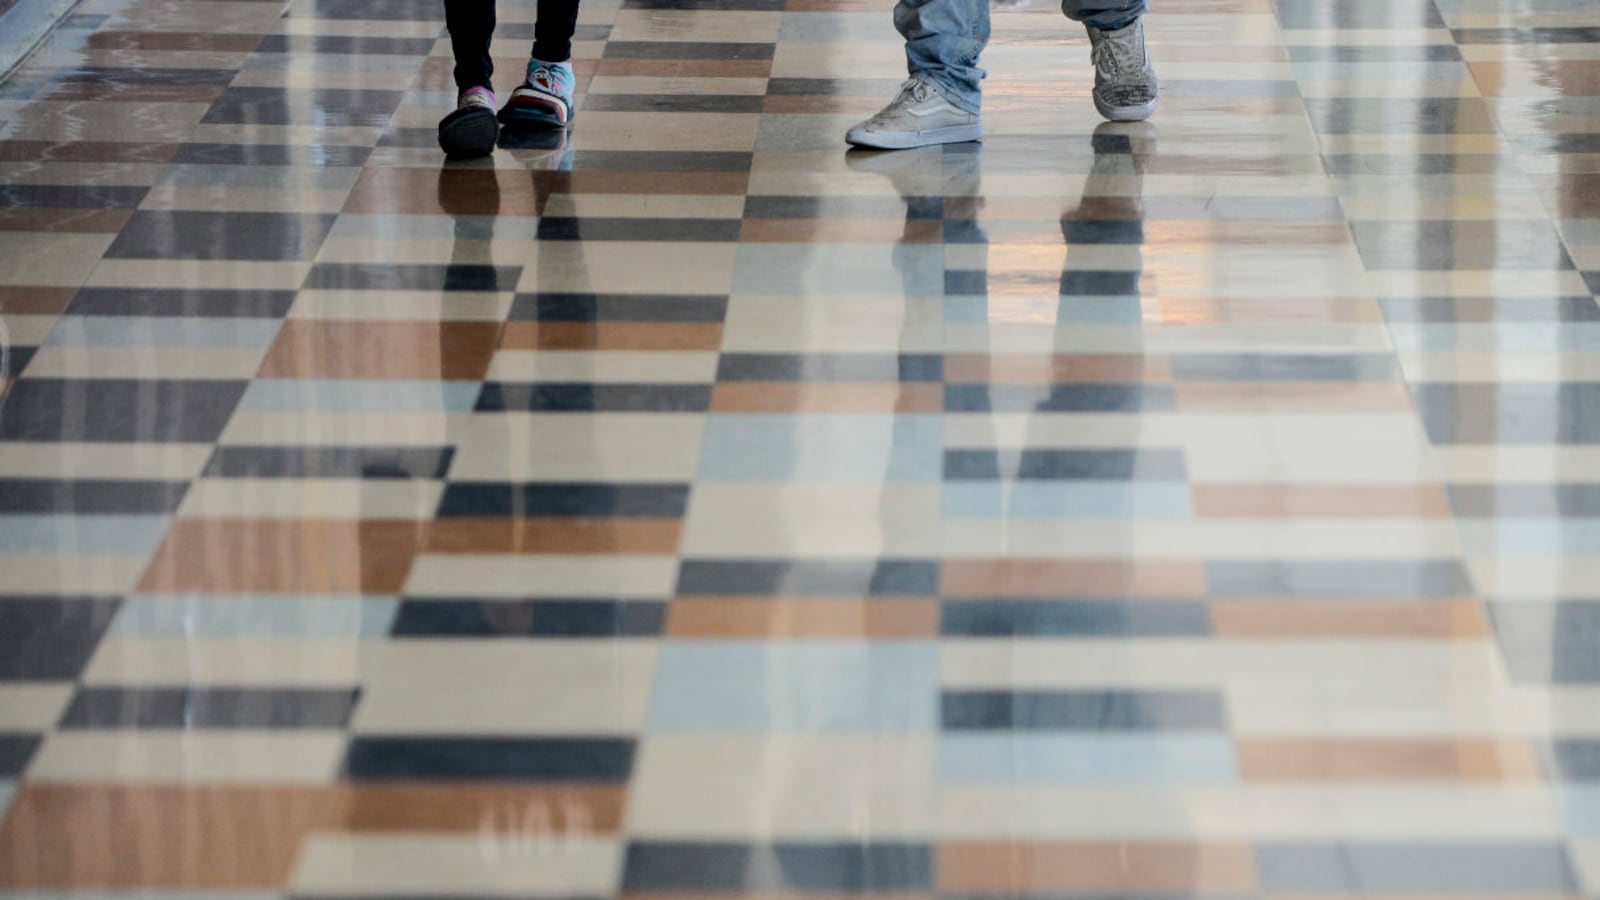 Students walk through the hall at Adams City High School Monday, Feb. 4, 2019 in Commerce City.